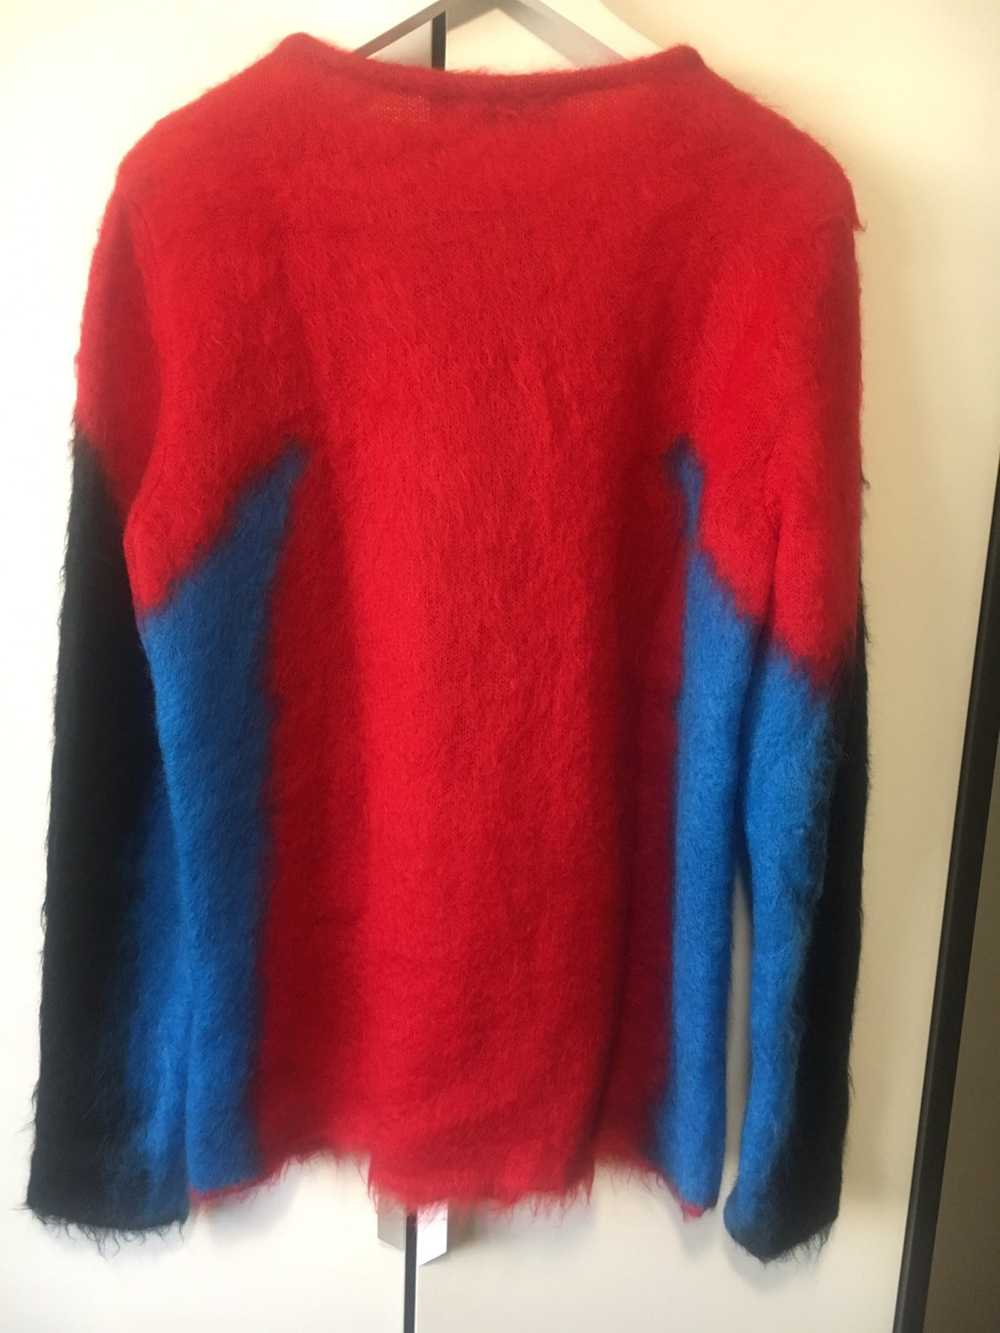 Louis Vuitton SS17 Red Impala Mohair Sweater - image 3